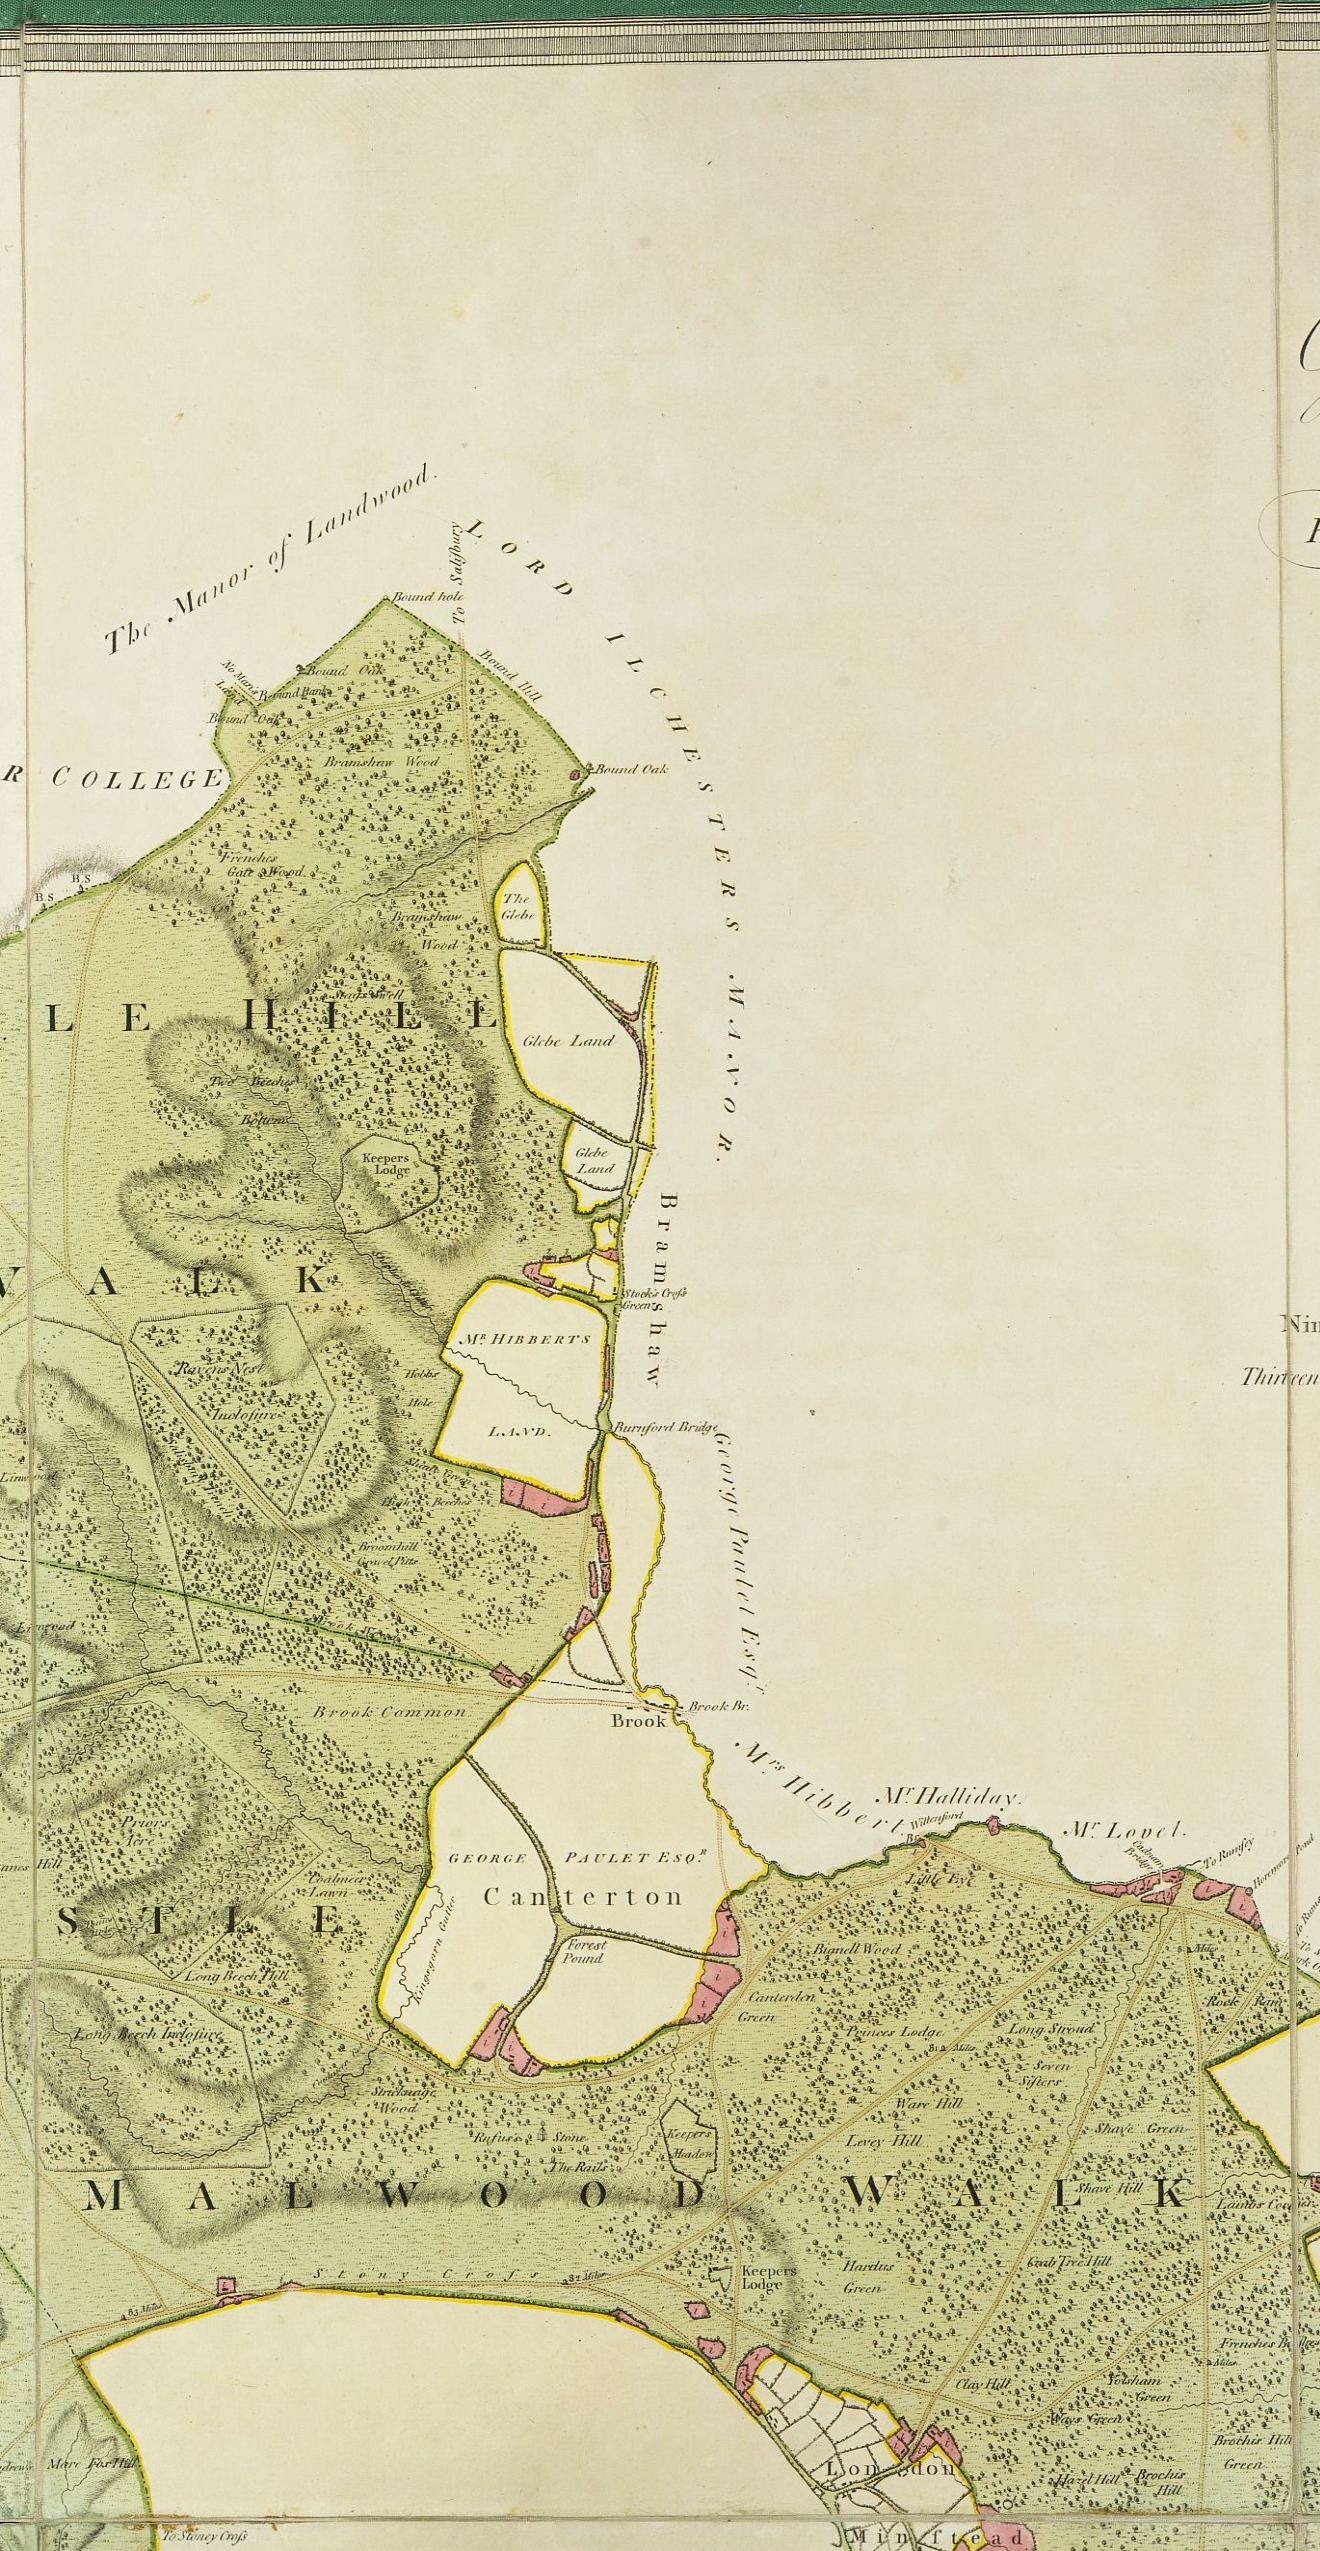 Digitisation of the Drivers’ Map of the New Forest – New Forest Knowledge